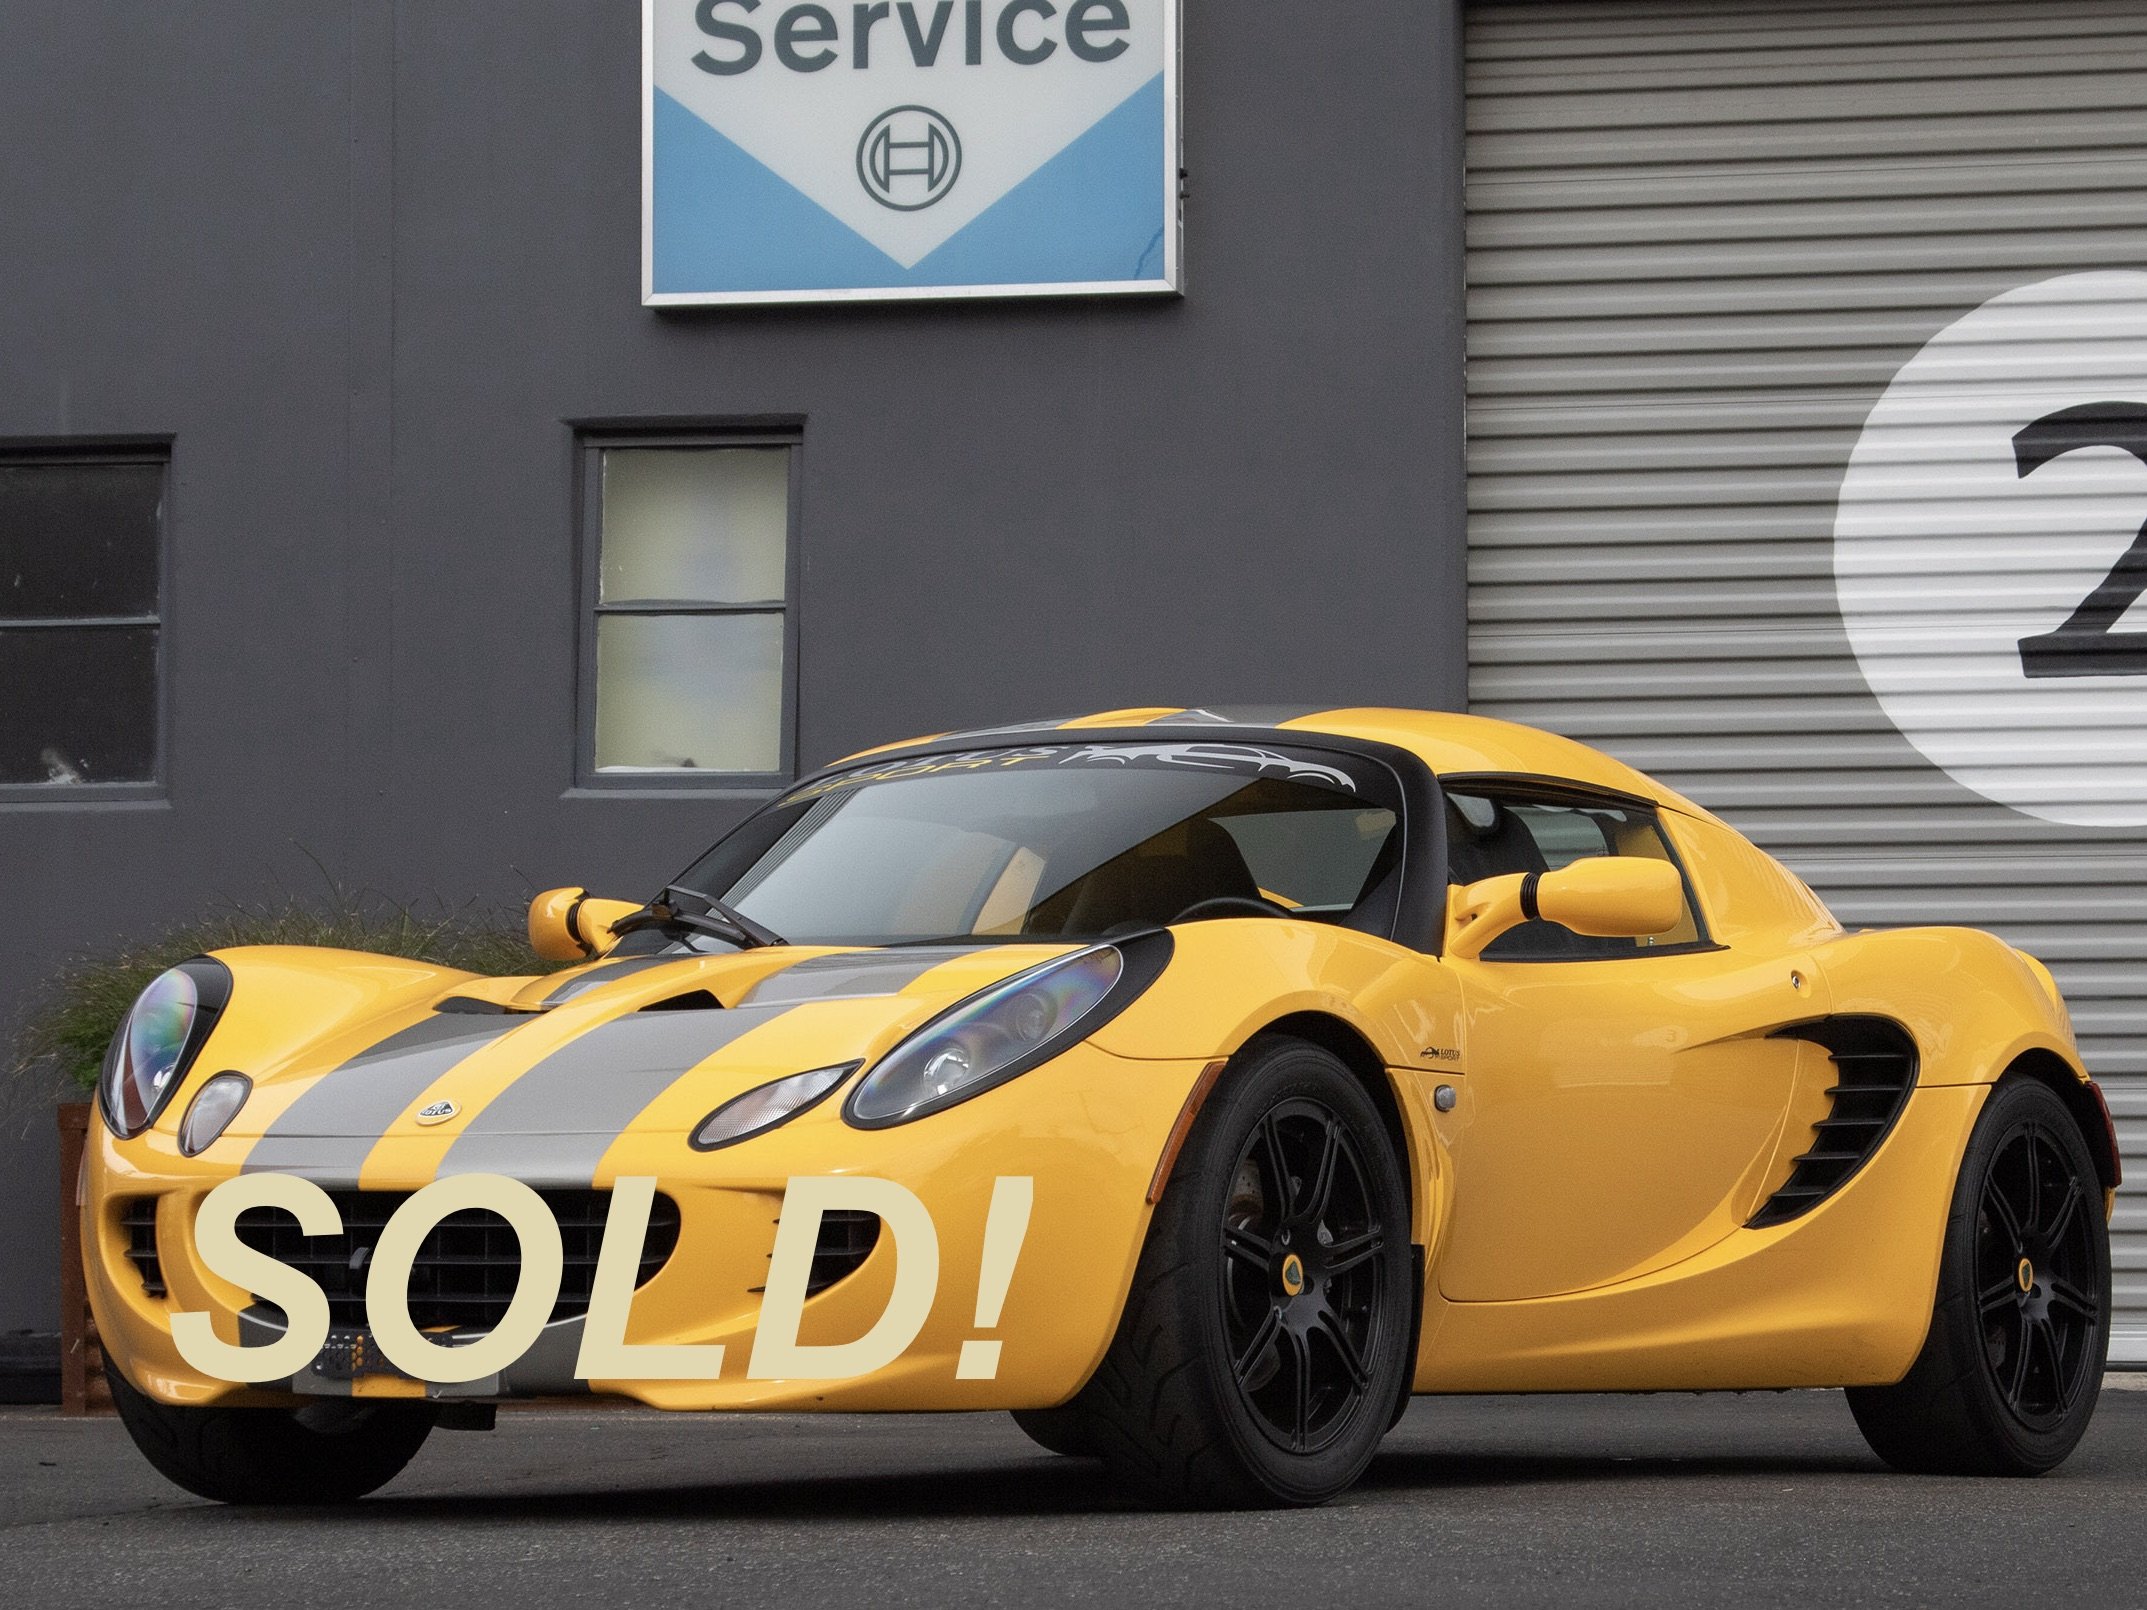 2006 Lotus Sport Elise #27 of 50 Limited Edition